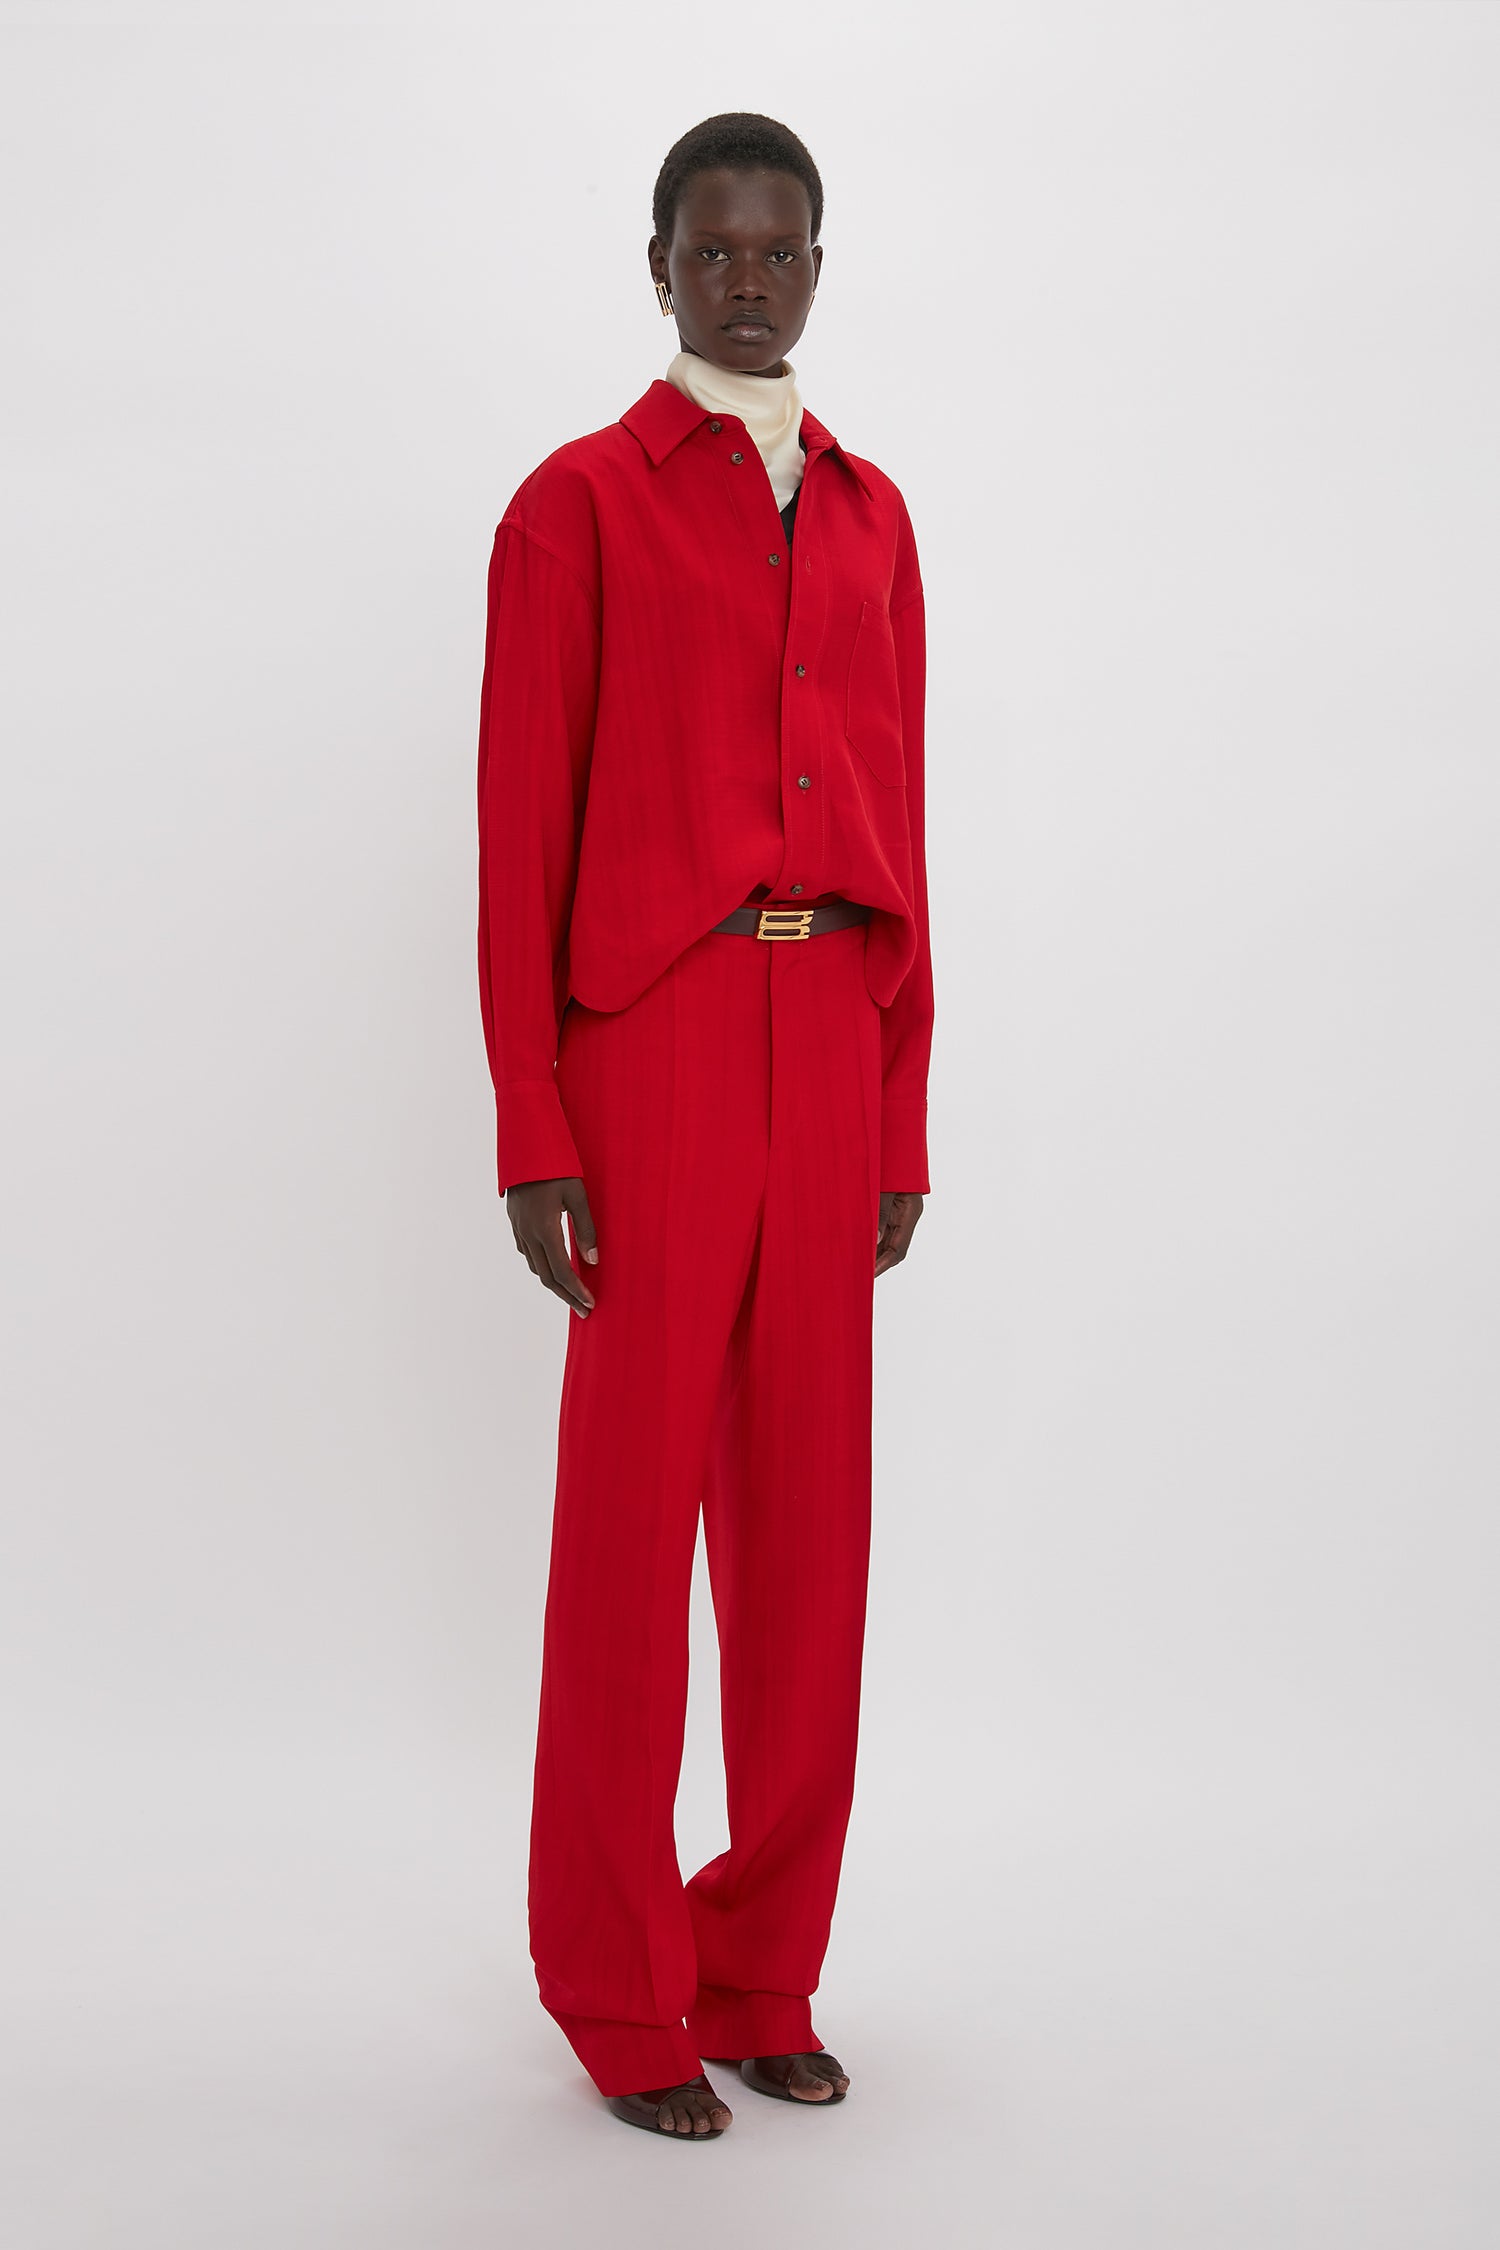 A person stands against a plain background, wearing the Cropped Long Sleeve Shirt In Carmine by Victoria Beckham, matching red pants, and black sandals.